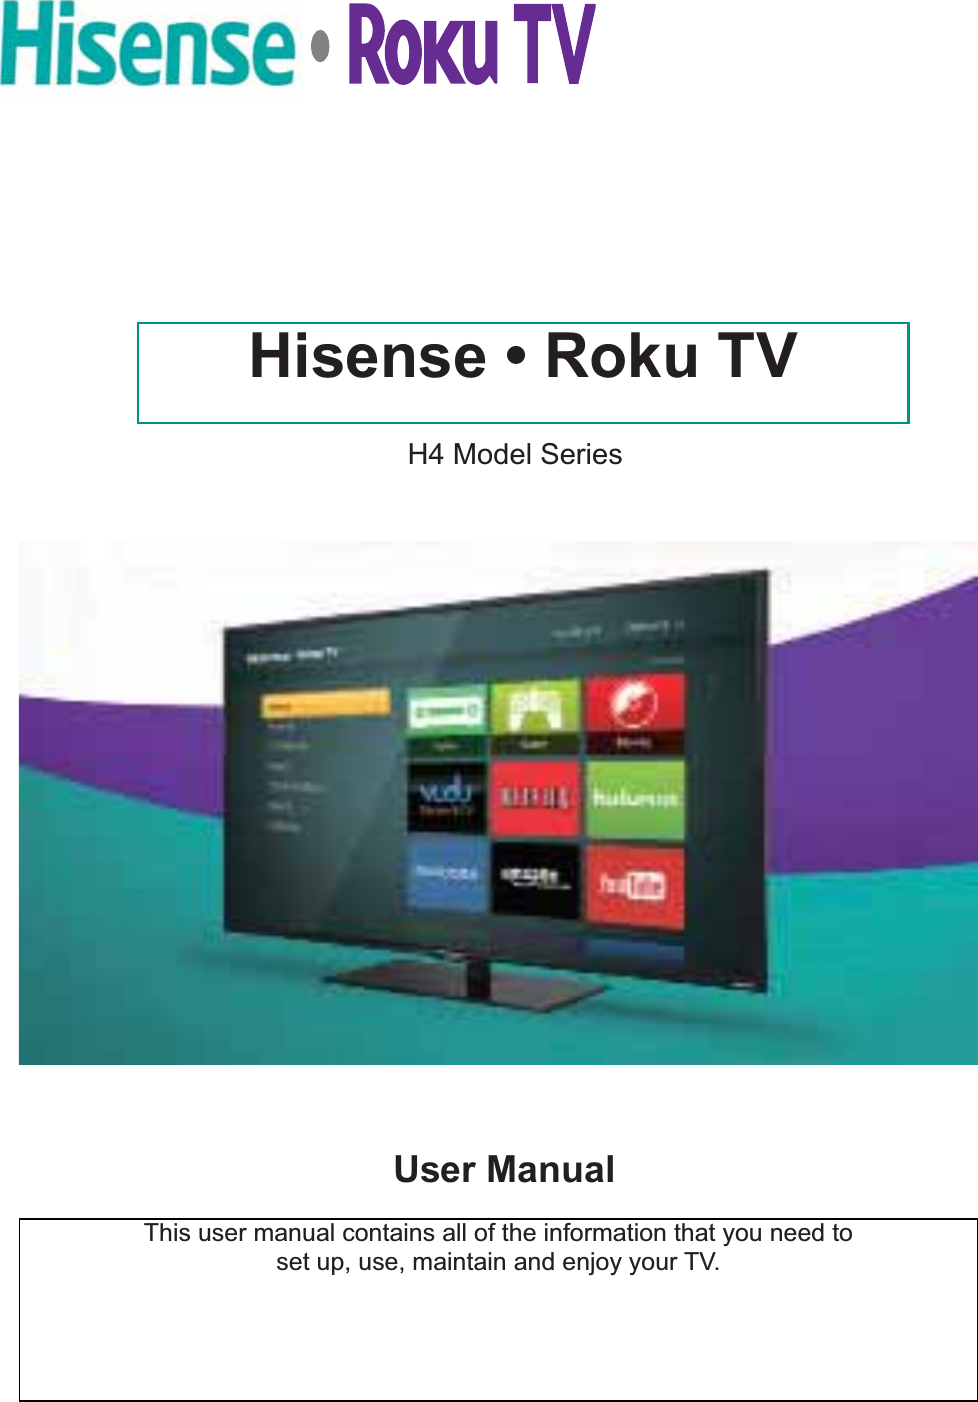 This user manual contains all of the information that you need to set up, use, maintain and enjoy your TV.H4 Model Series Hisense • Roku TVUser Manual